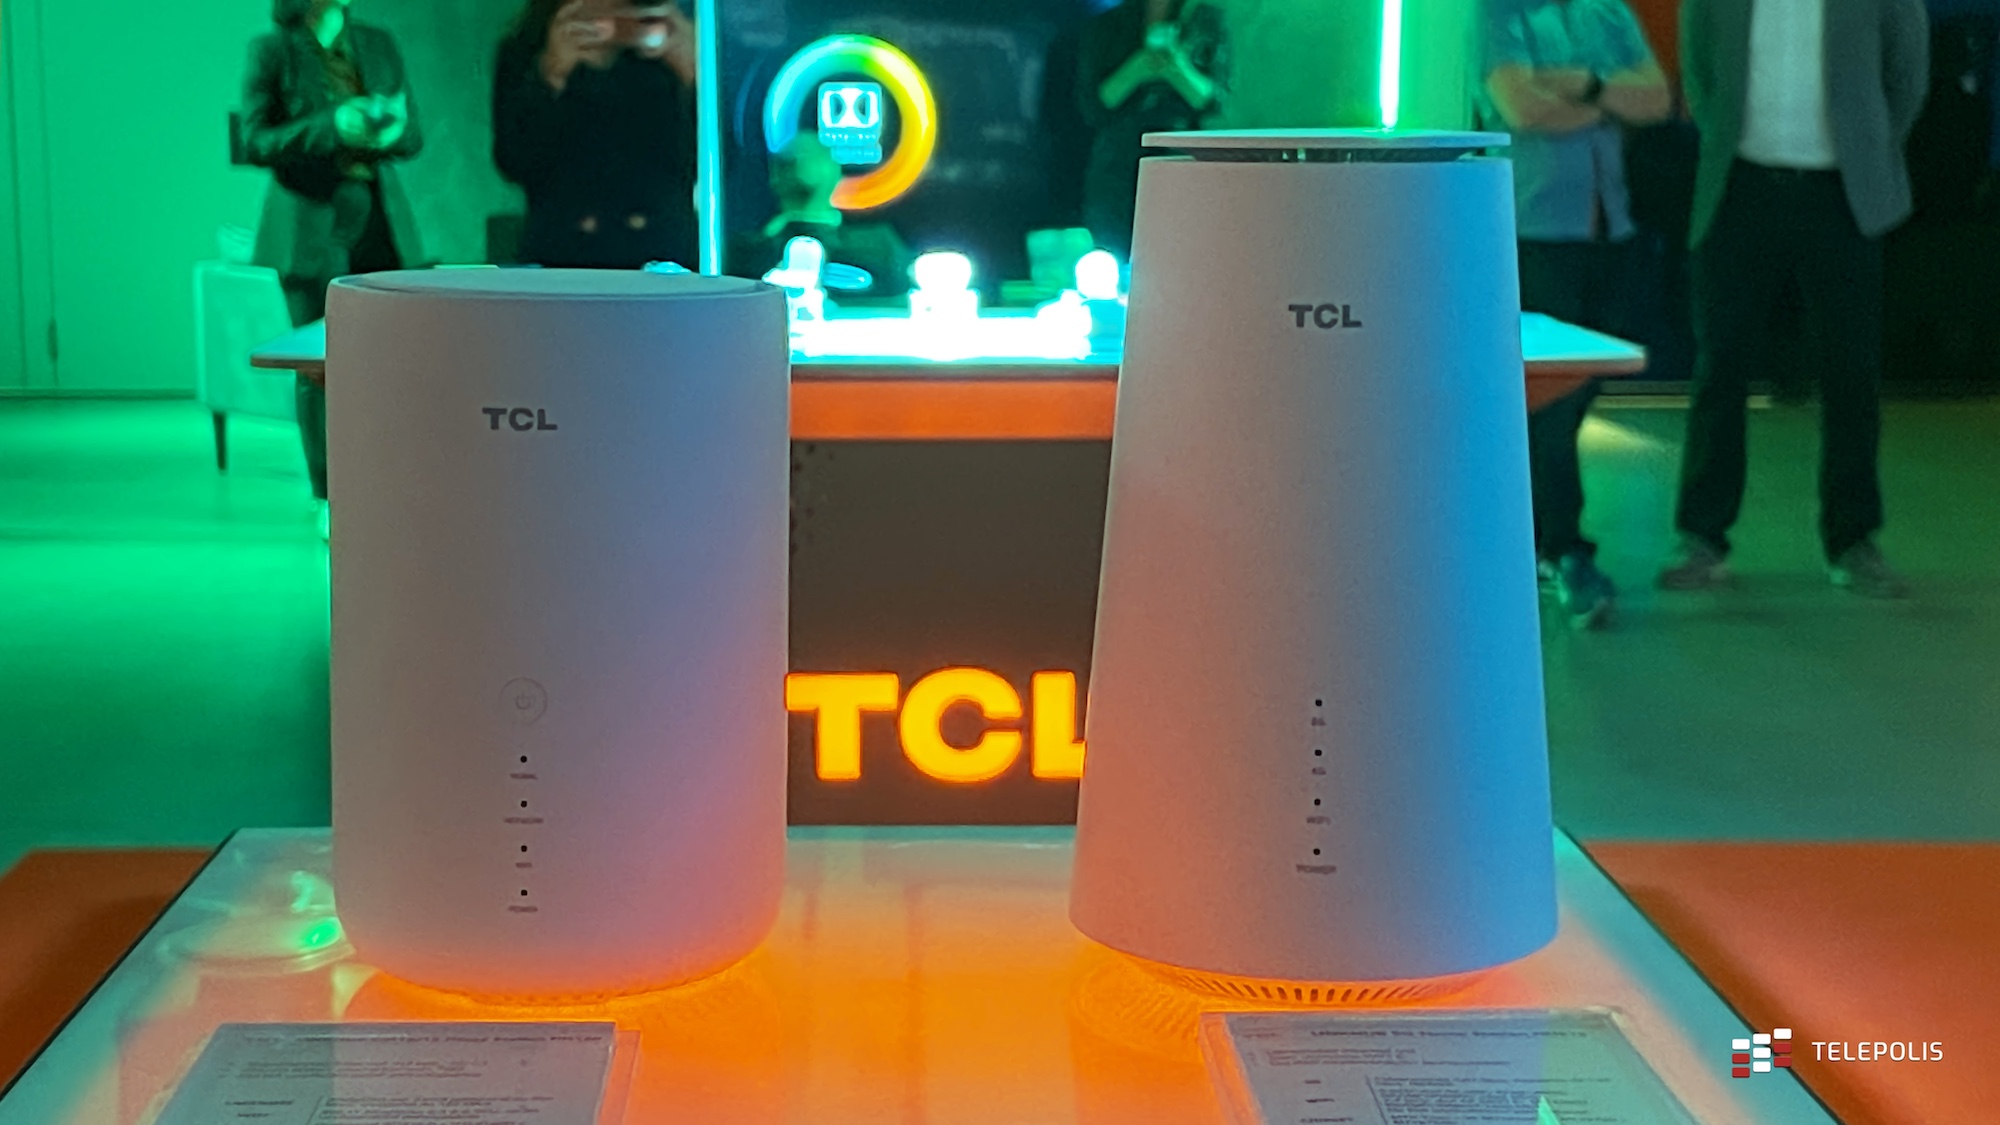 TCL LINKHUB - 5G Home Station (right) and LTE Cat13 Home Station (left) modems